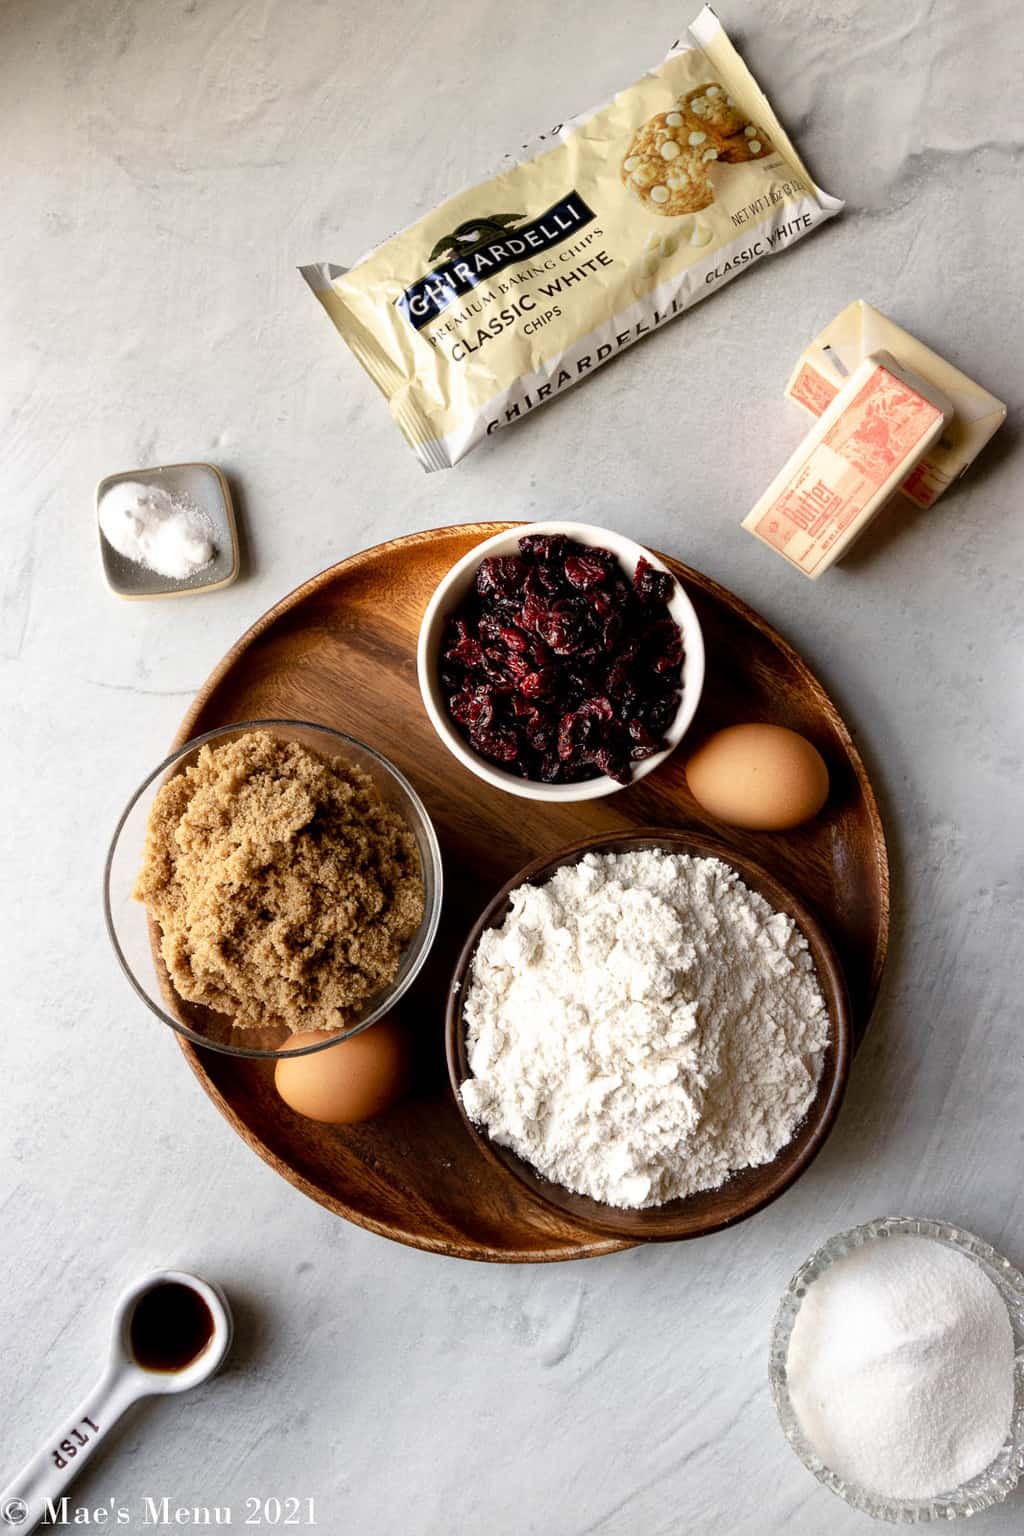 All the ingredients for brown butter white chocolate chip cookies: white chocolate chips, baking soda, butter, dried cranberries, brown sugar, white sugar, flour, eggs, and vanilla extract